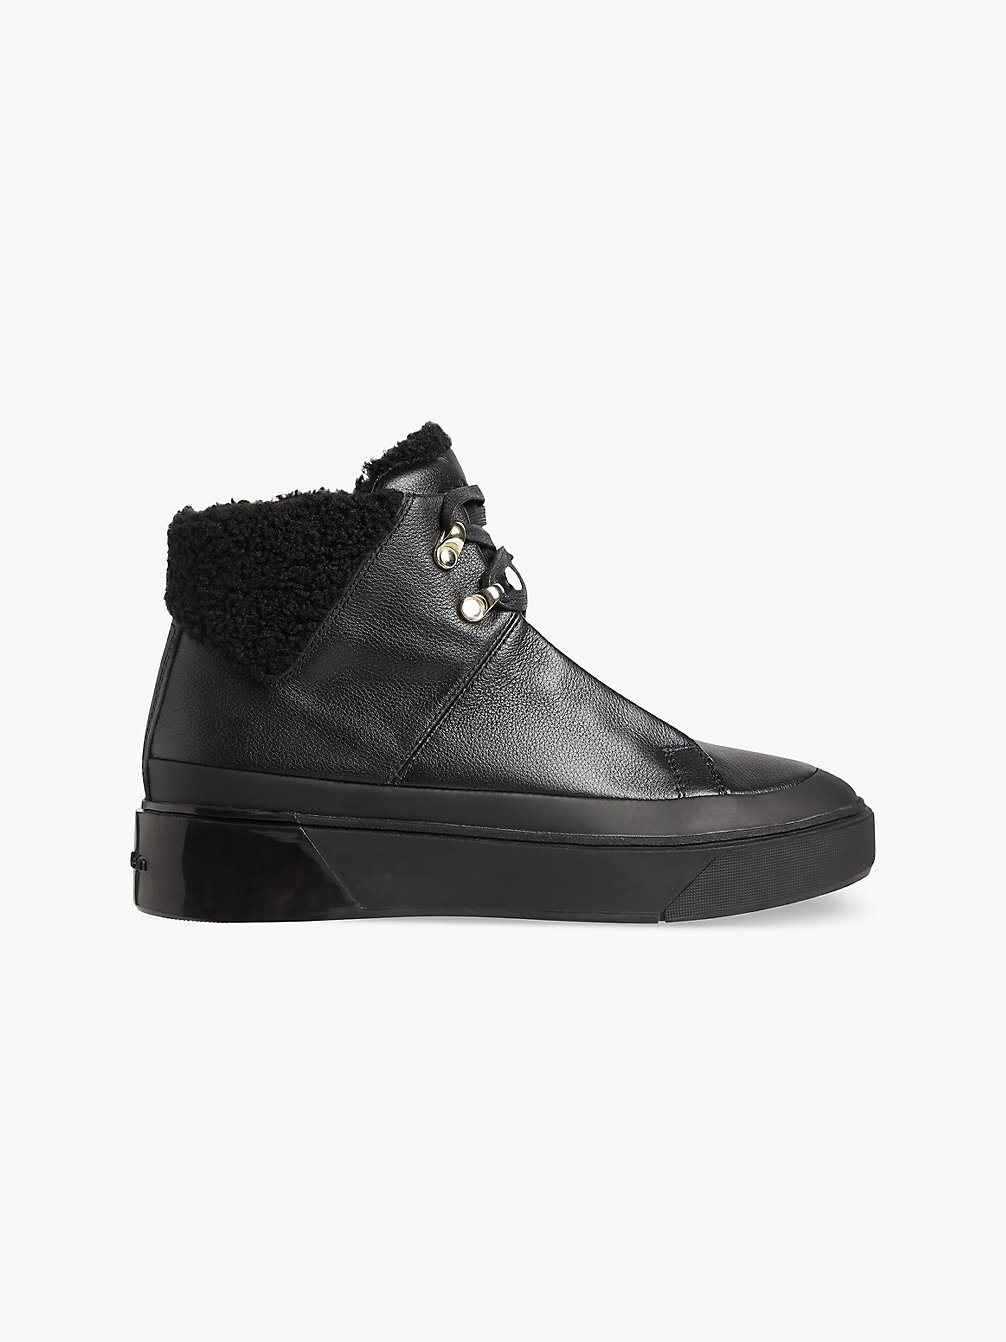 TRIPLE BLACK Leather High-Top Trainers undefined women Calvin Klein